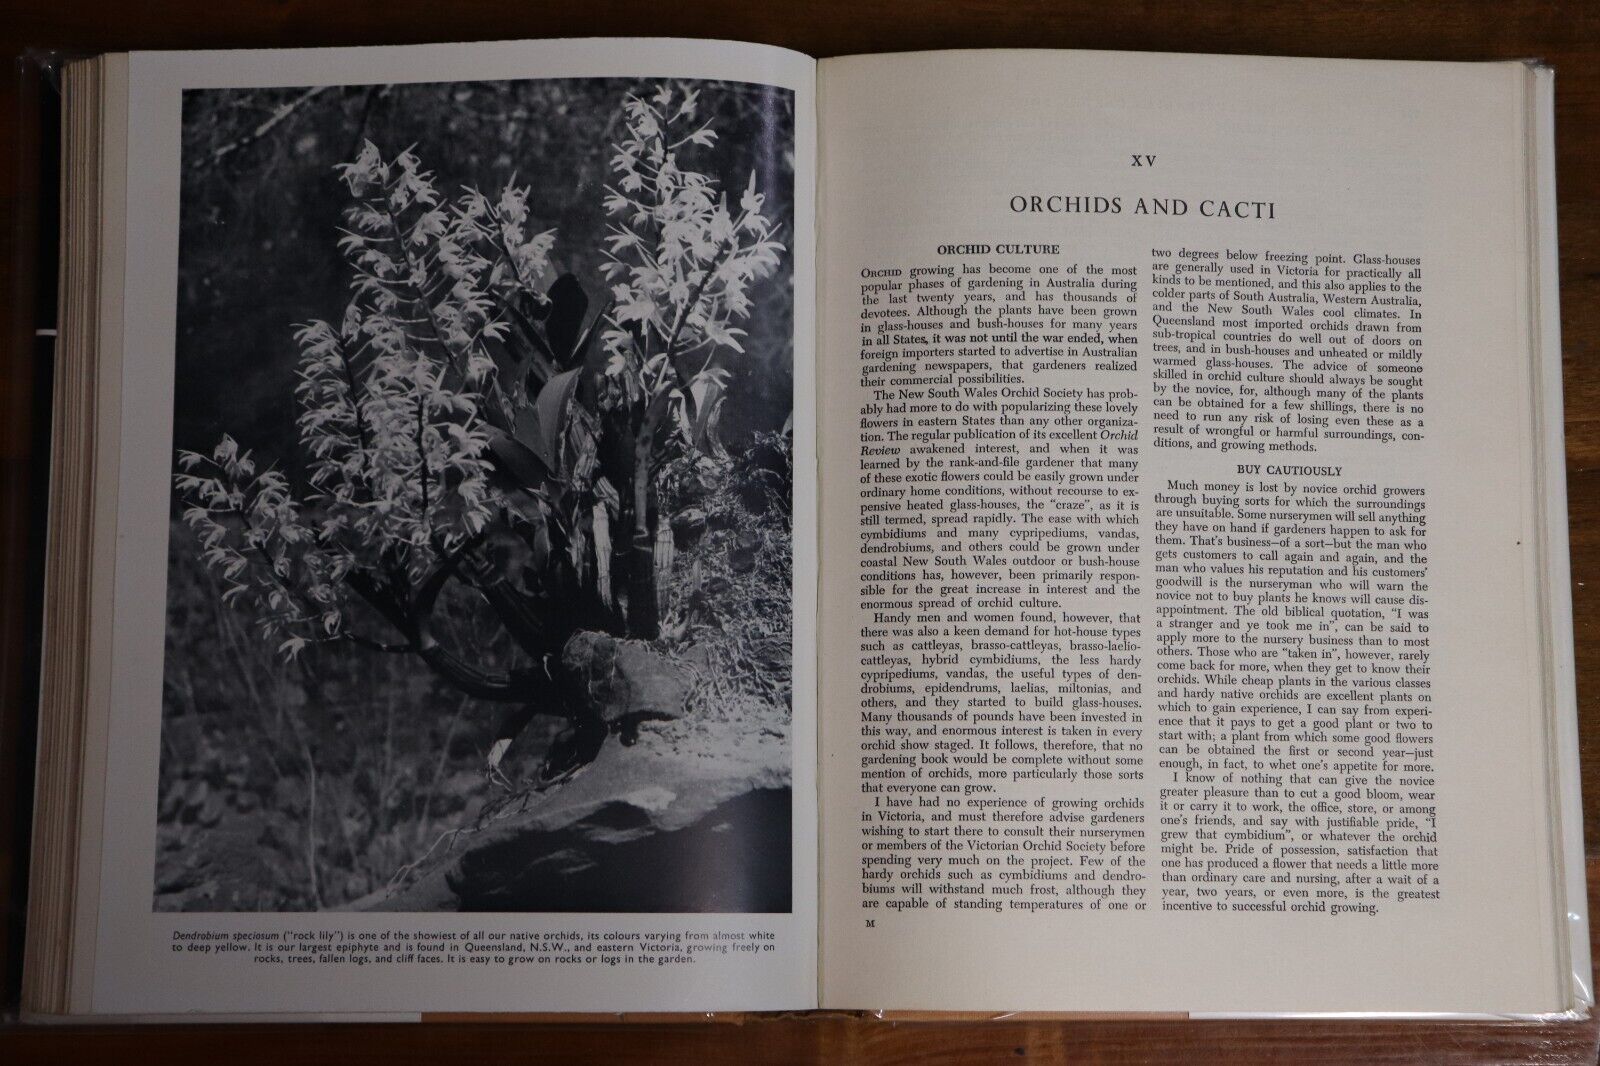 The Australian Garden Book by RG Edwards - 1958 - Gardening Reference Book